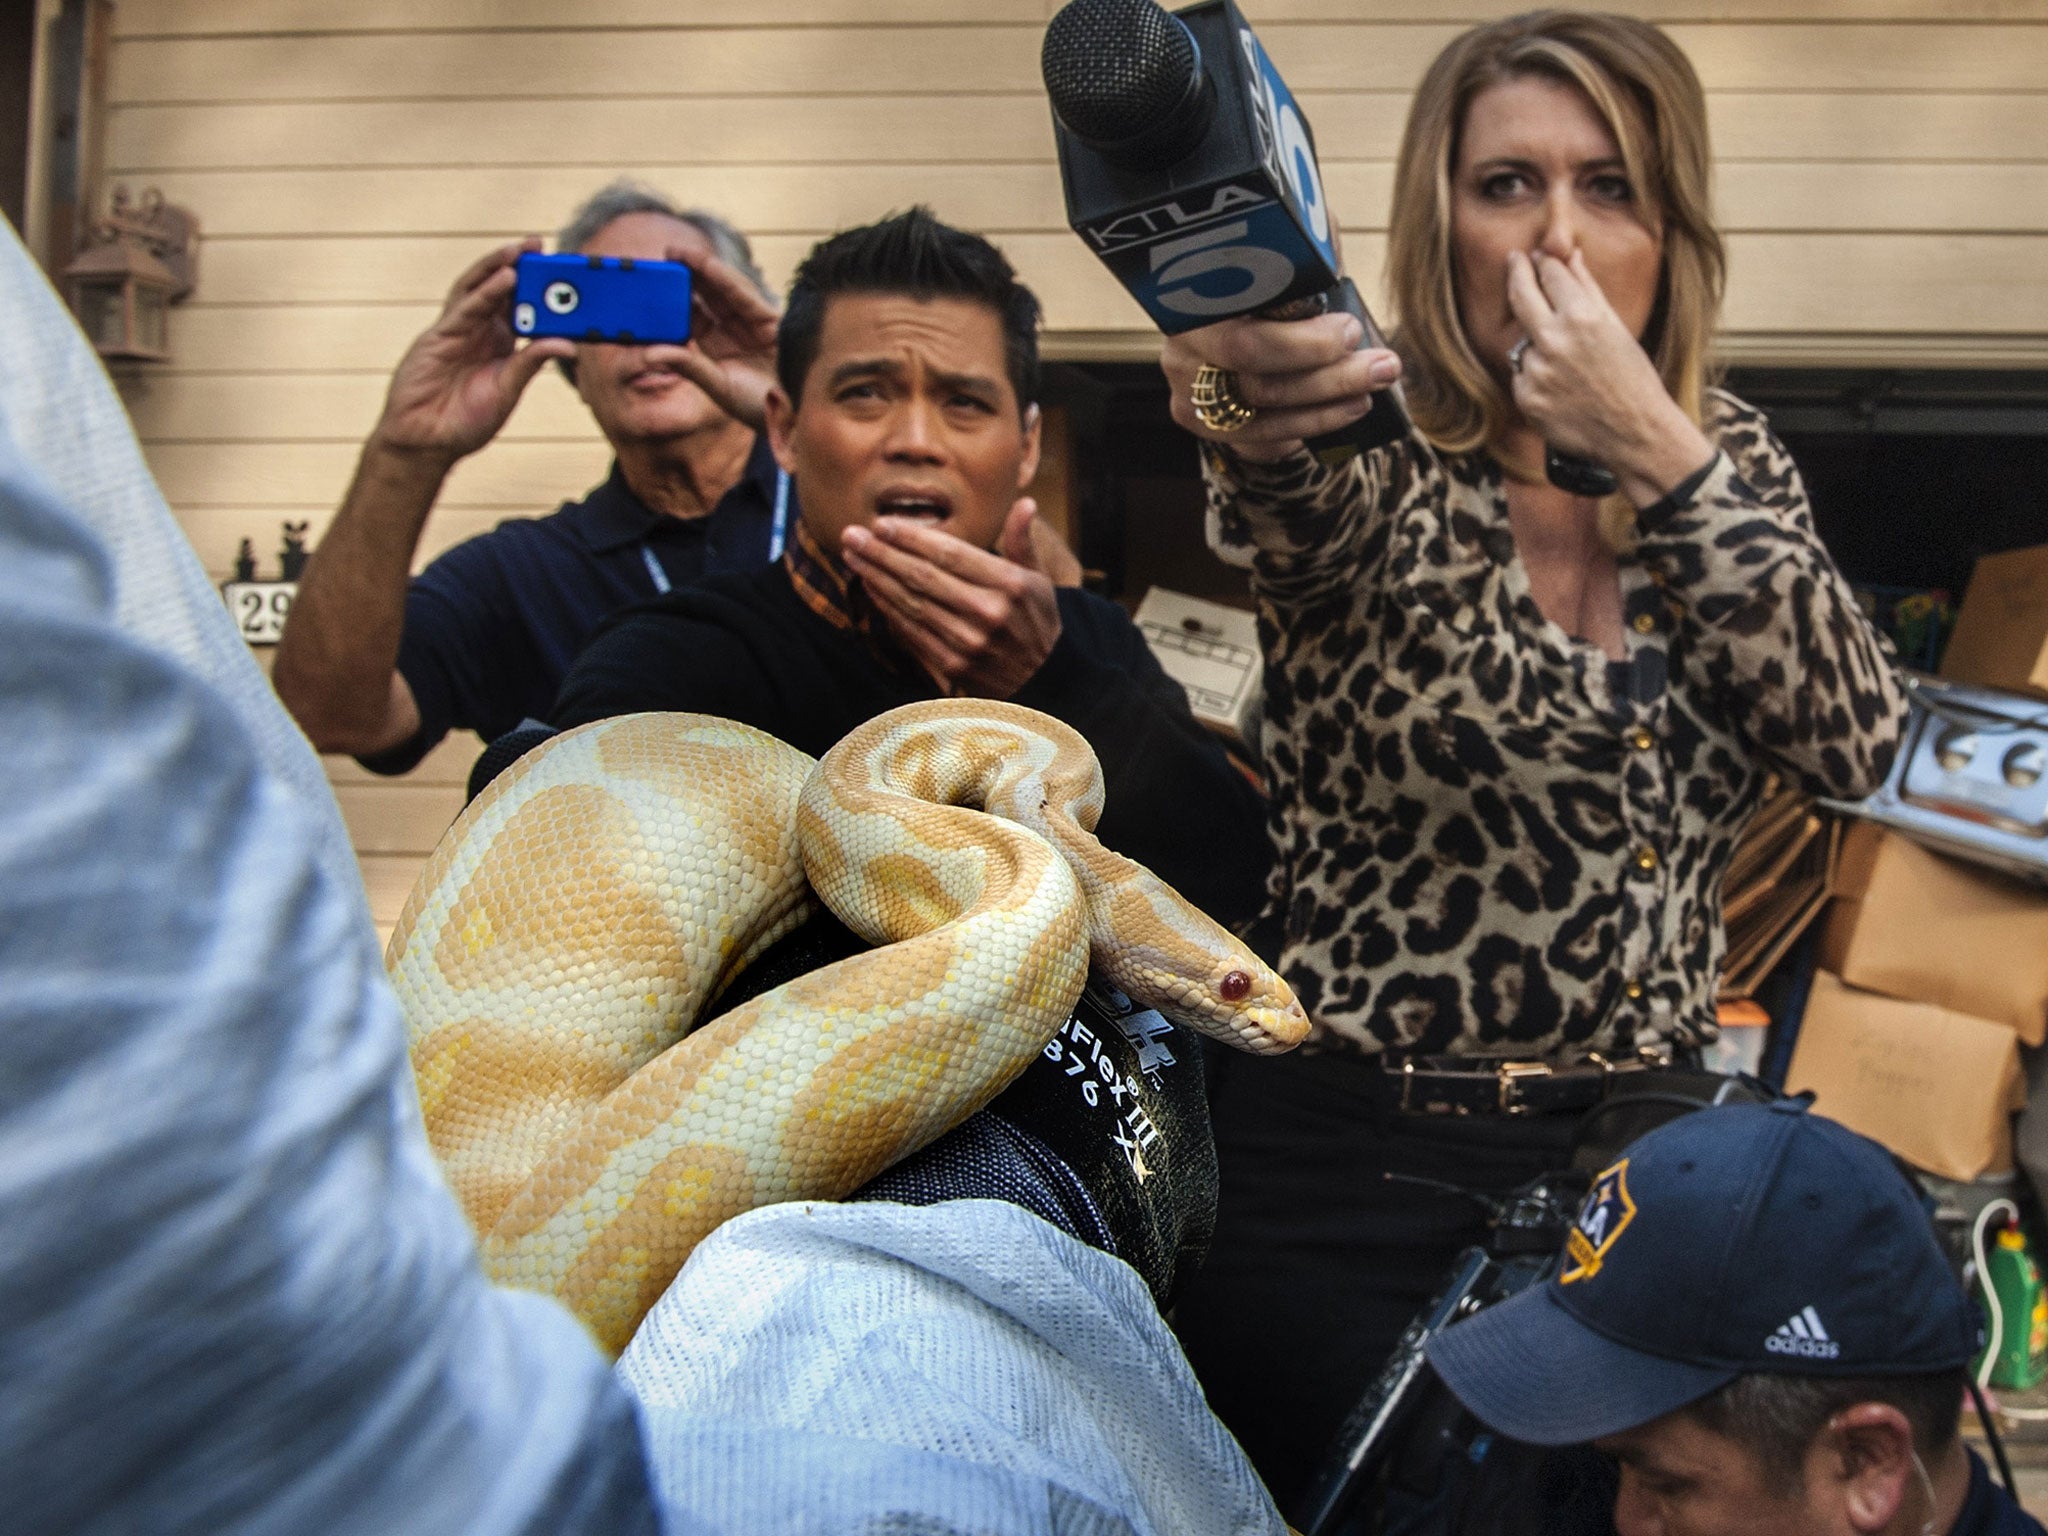 While interviewing Sondra Berg, Santa Ana Police Animal Services supervisor, television reporters Bobby DeCastro, from FOX11, and Wendy Burch, of KTLA 5 plug their noses to avoid the stench emanating from the house with of dead and decaying snakes in San